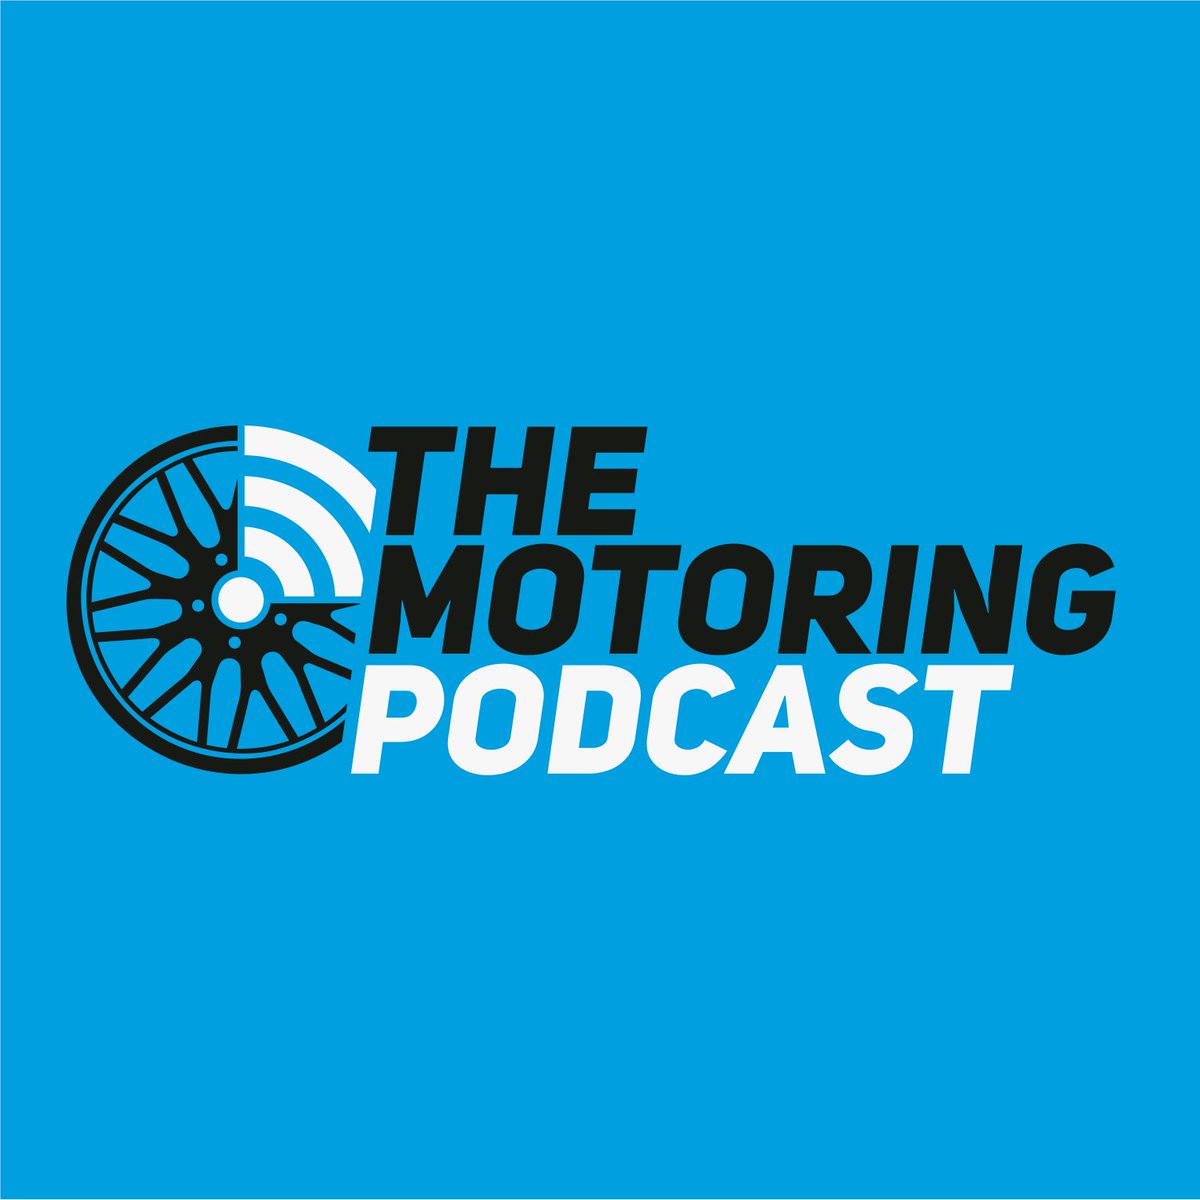 Mercedes have charged an eActros 600 lorry at 1 mega watt, for the first time. This is a big step for charging lorries, due to their use case and needs of industry. To 👂 via streaming click 👉 motoringpodcast.com/episodes/2024/… To👂 via Apple/Google click 👉 smarturl.it/mpnewsshow